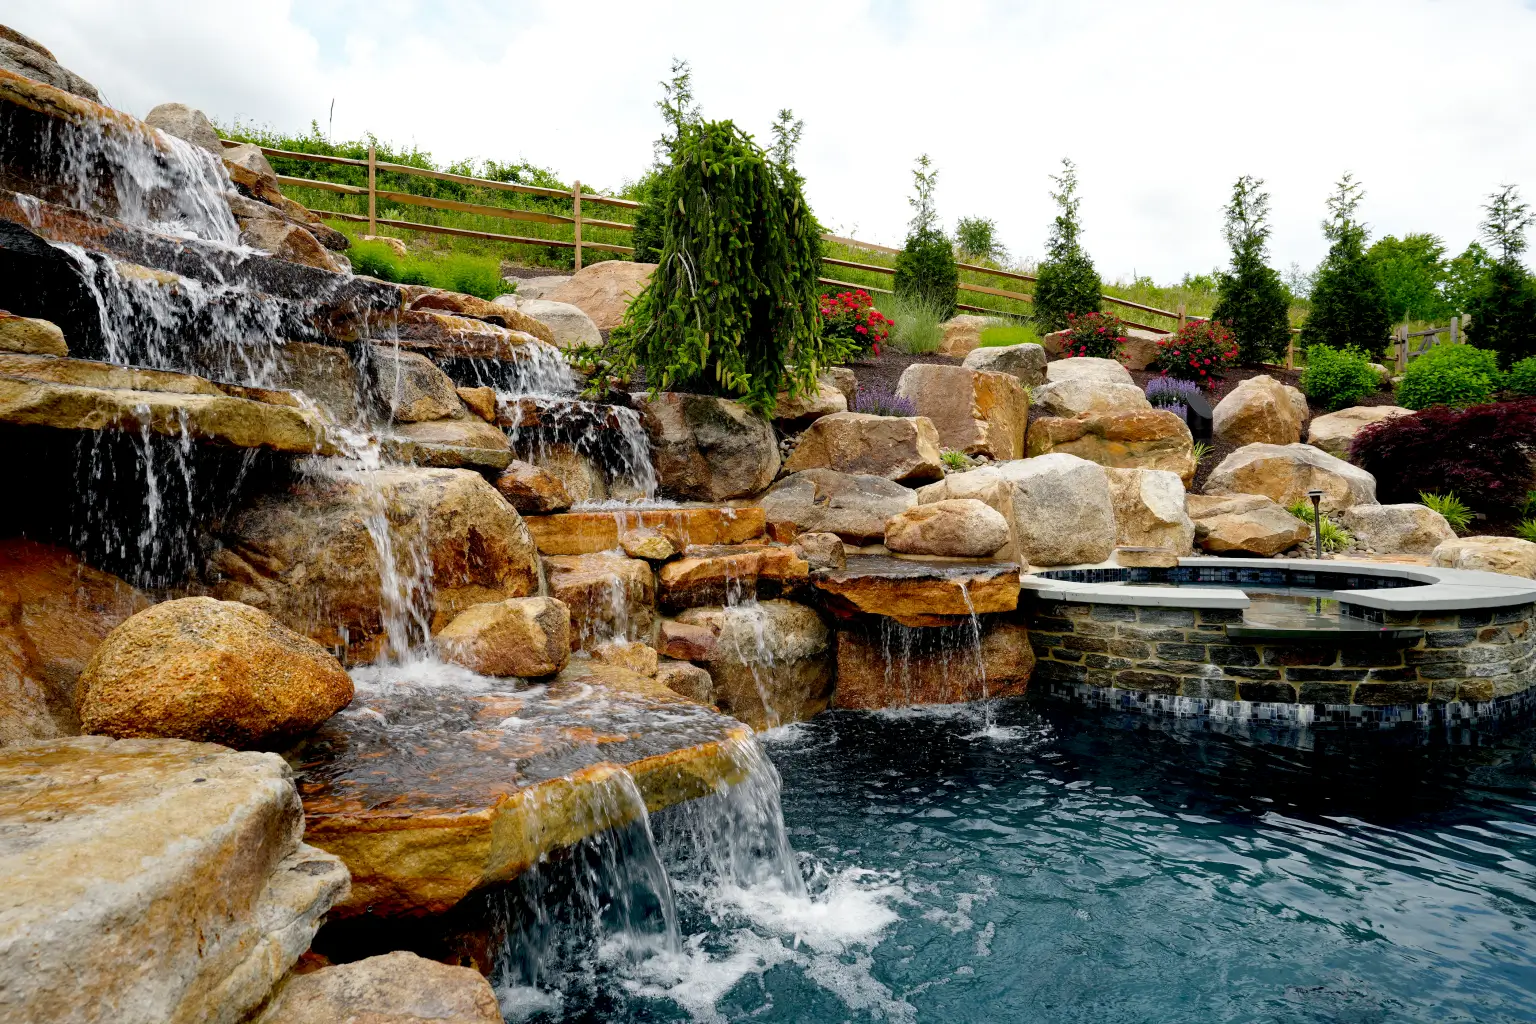 A stunning landscape design featuring a pool with a picturesque waterfall and rocks in the background.